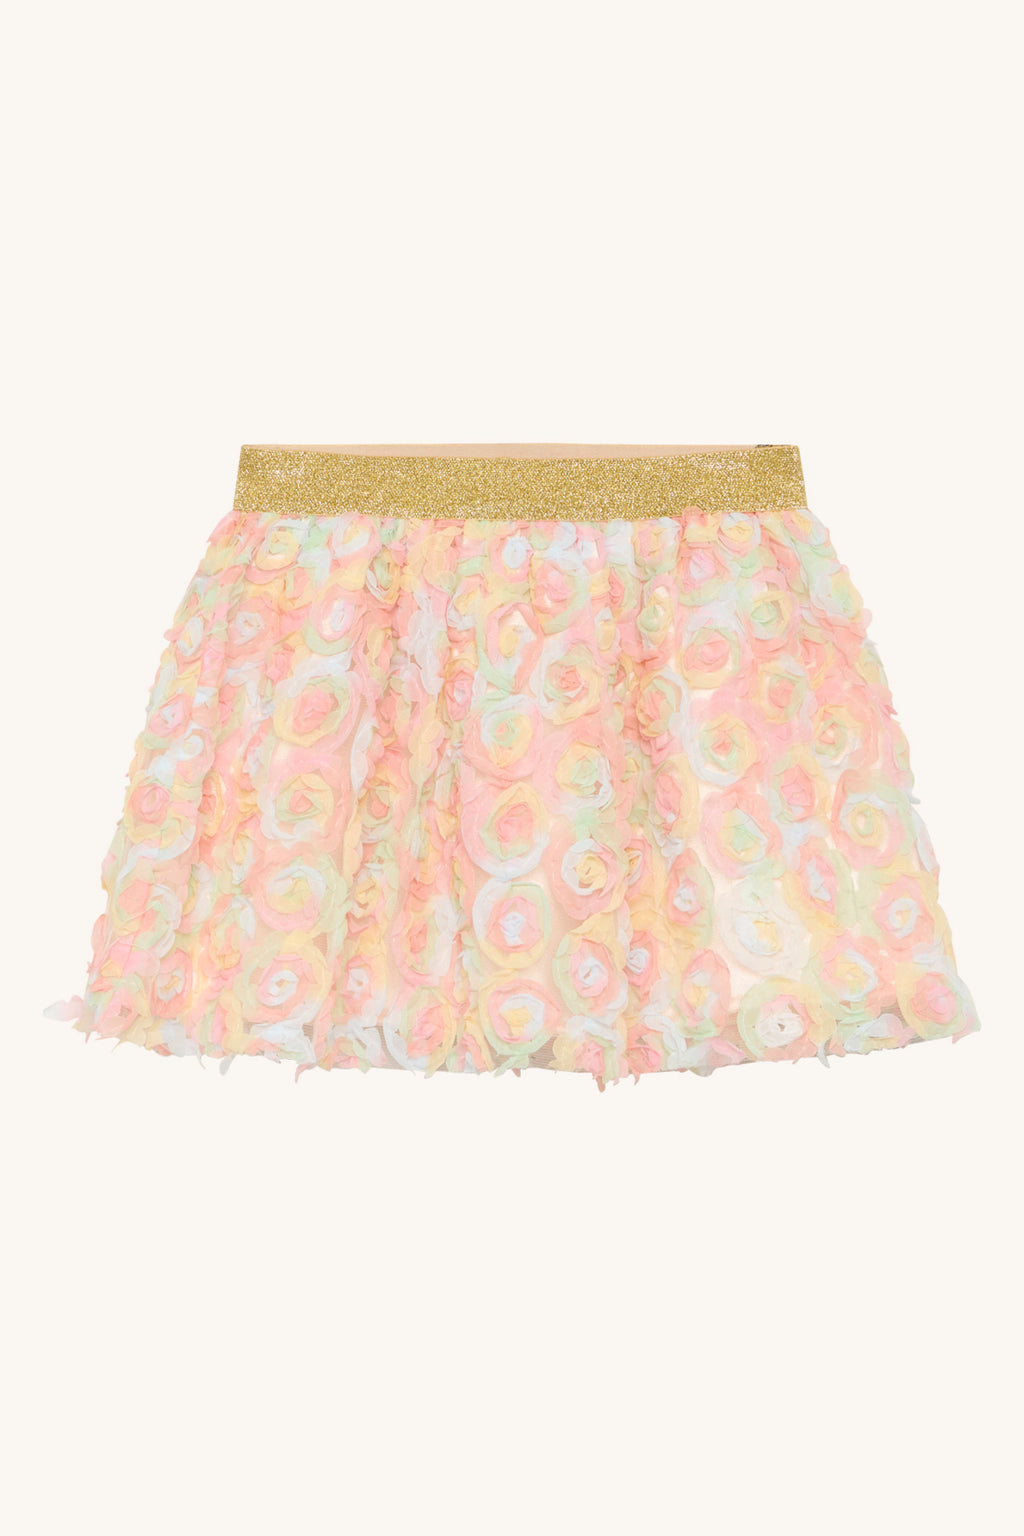 Hust and Claire Nena Skirt